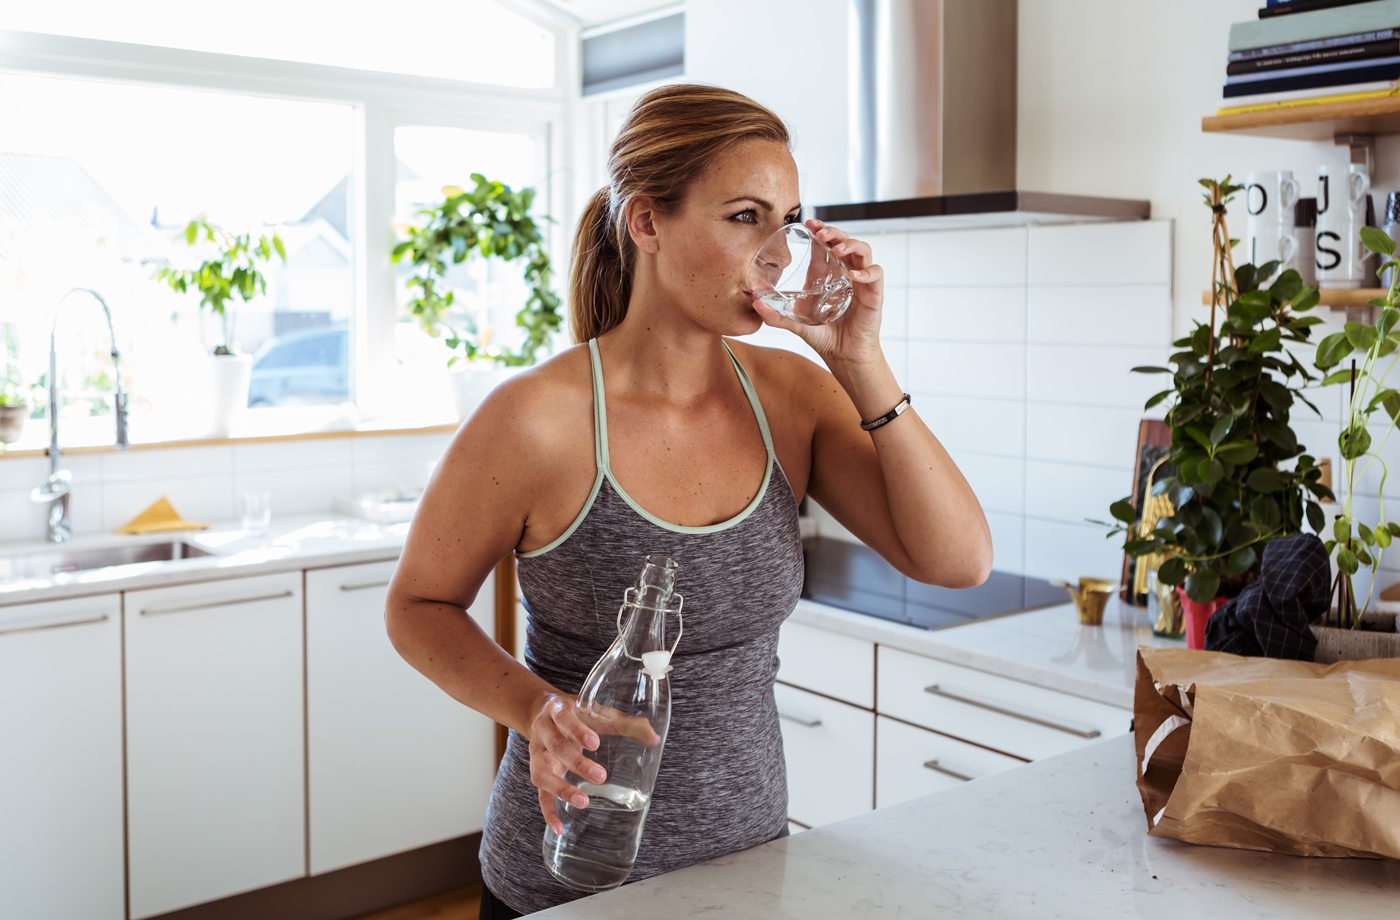 Get frequent UTIs? Upping your daily water intake by *this* much could stop them in their tracks